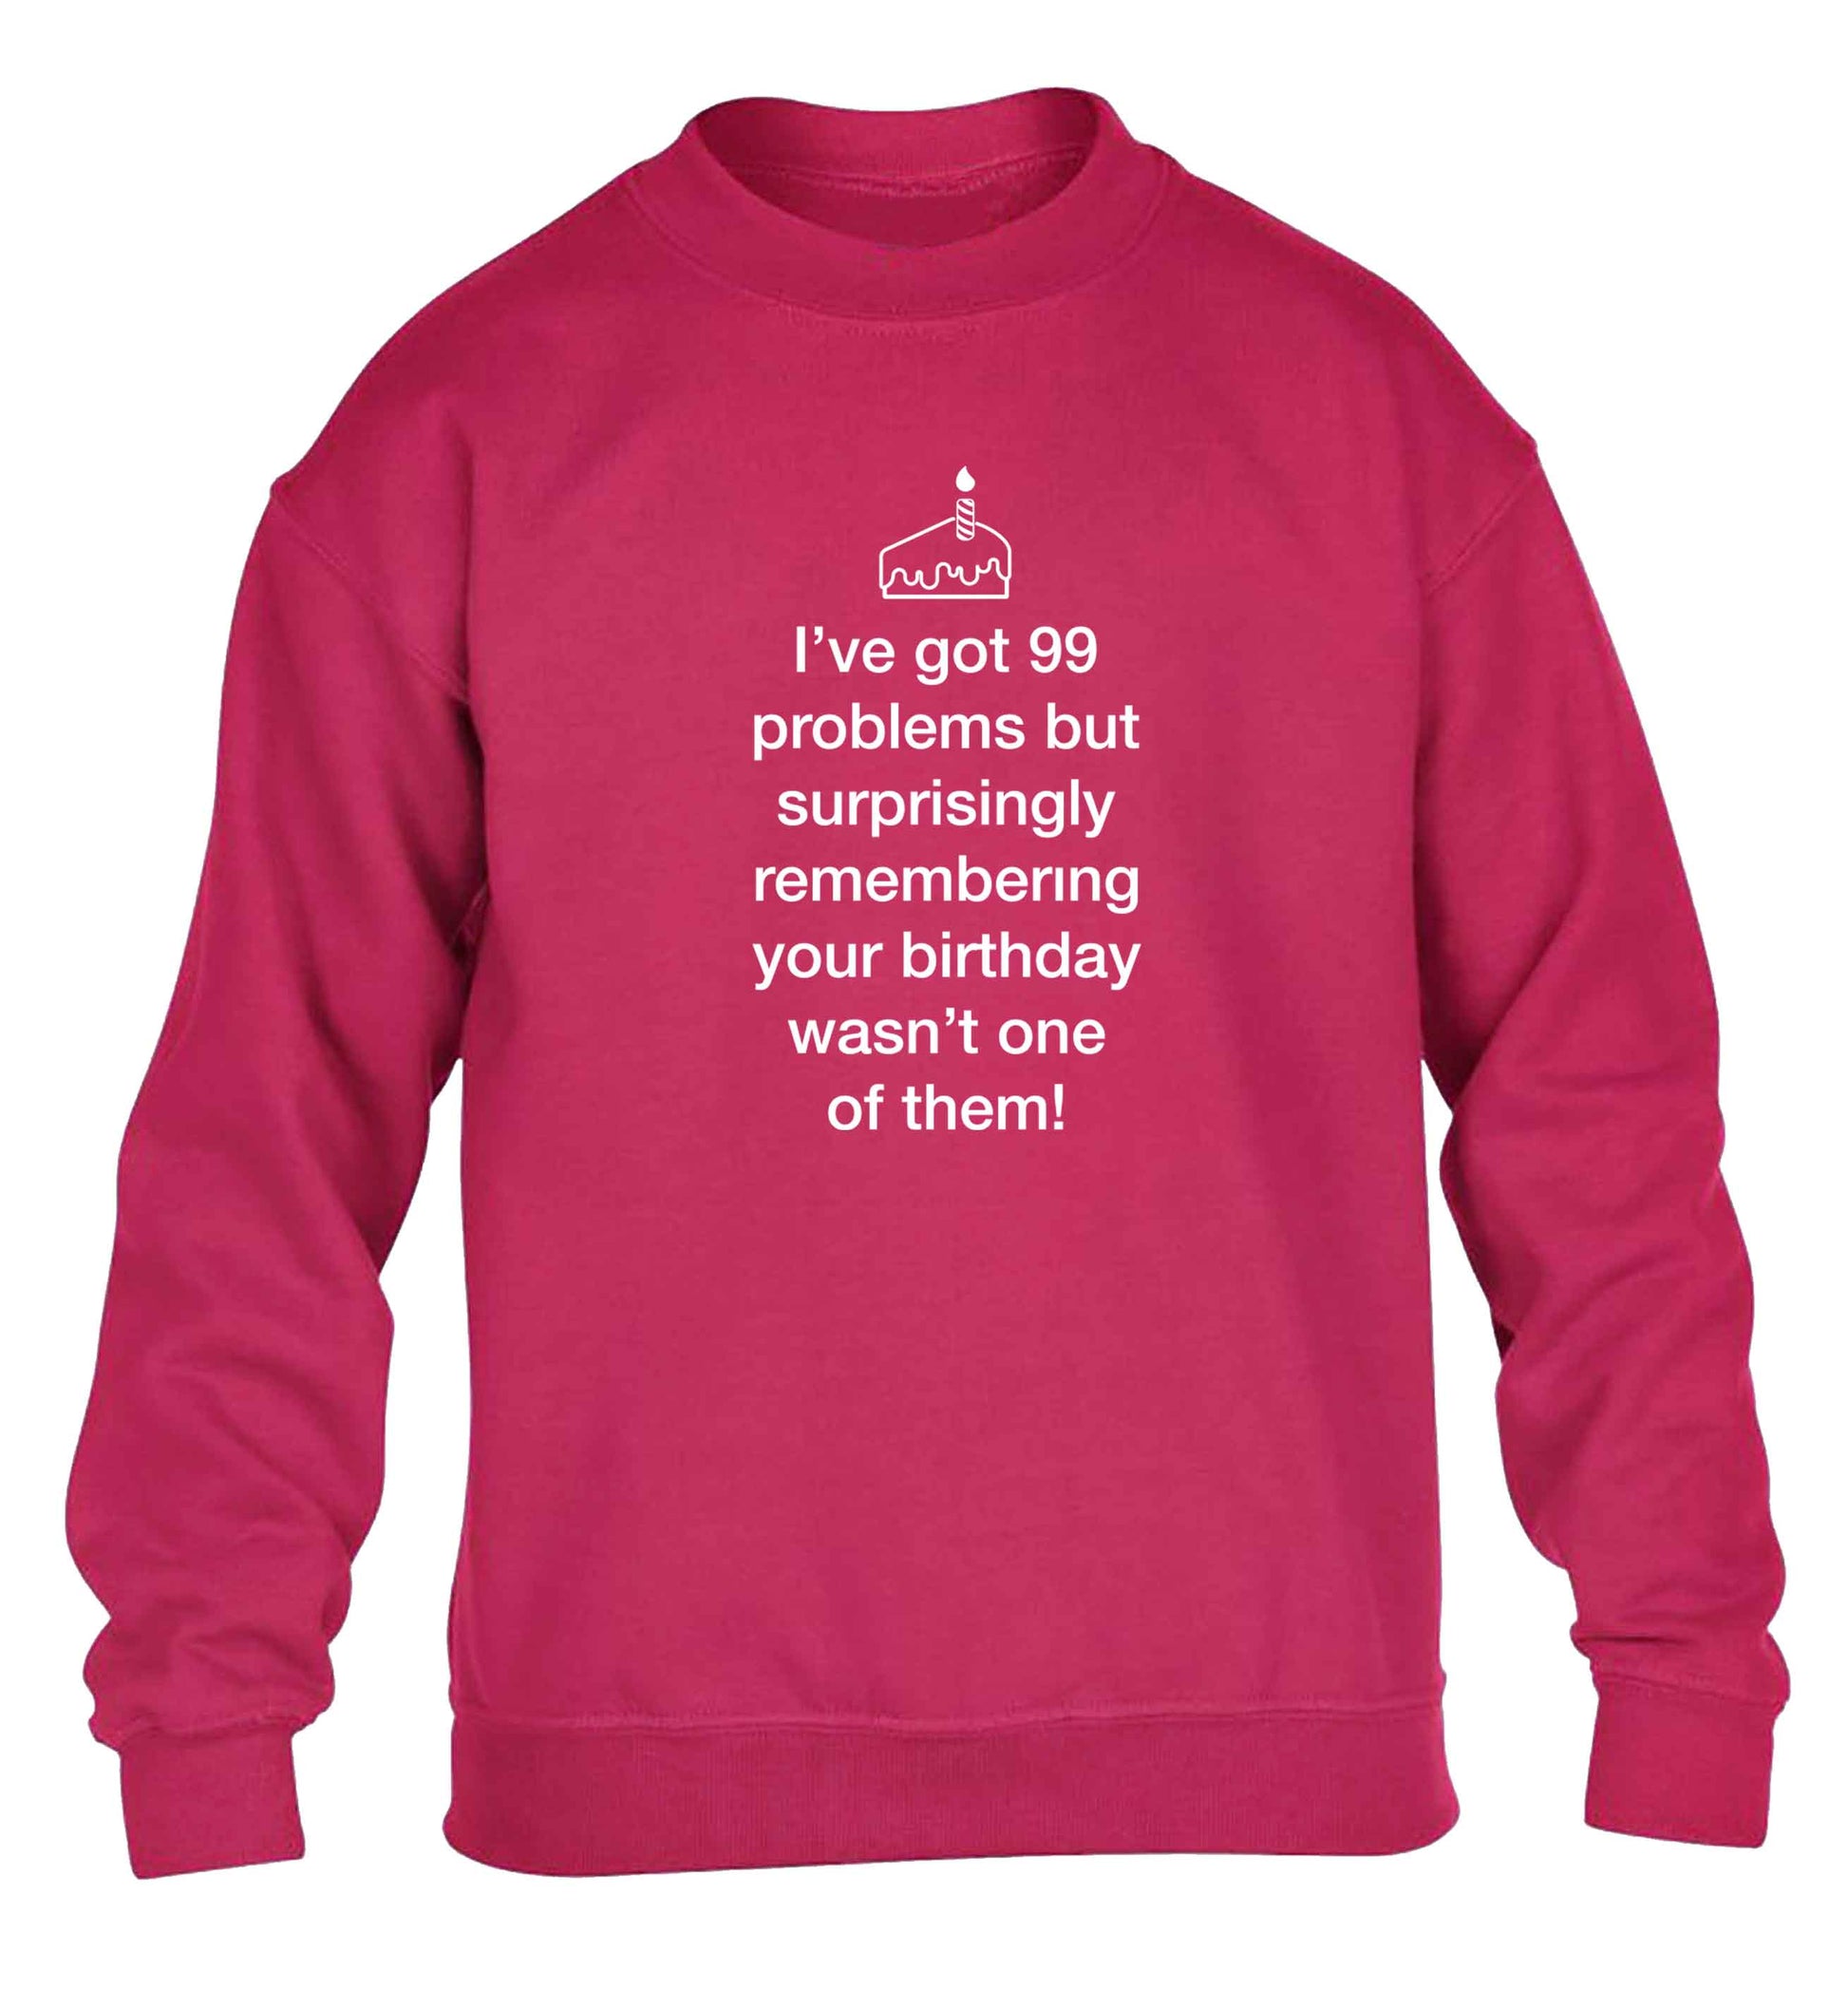 I've got 99 problems but surprisingly remembering your birthday wasn't one of them! children's pink sweater 12-13 Years